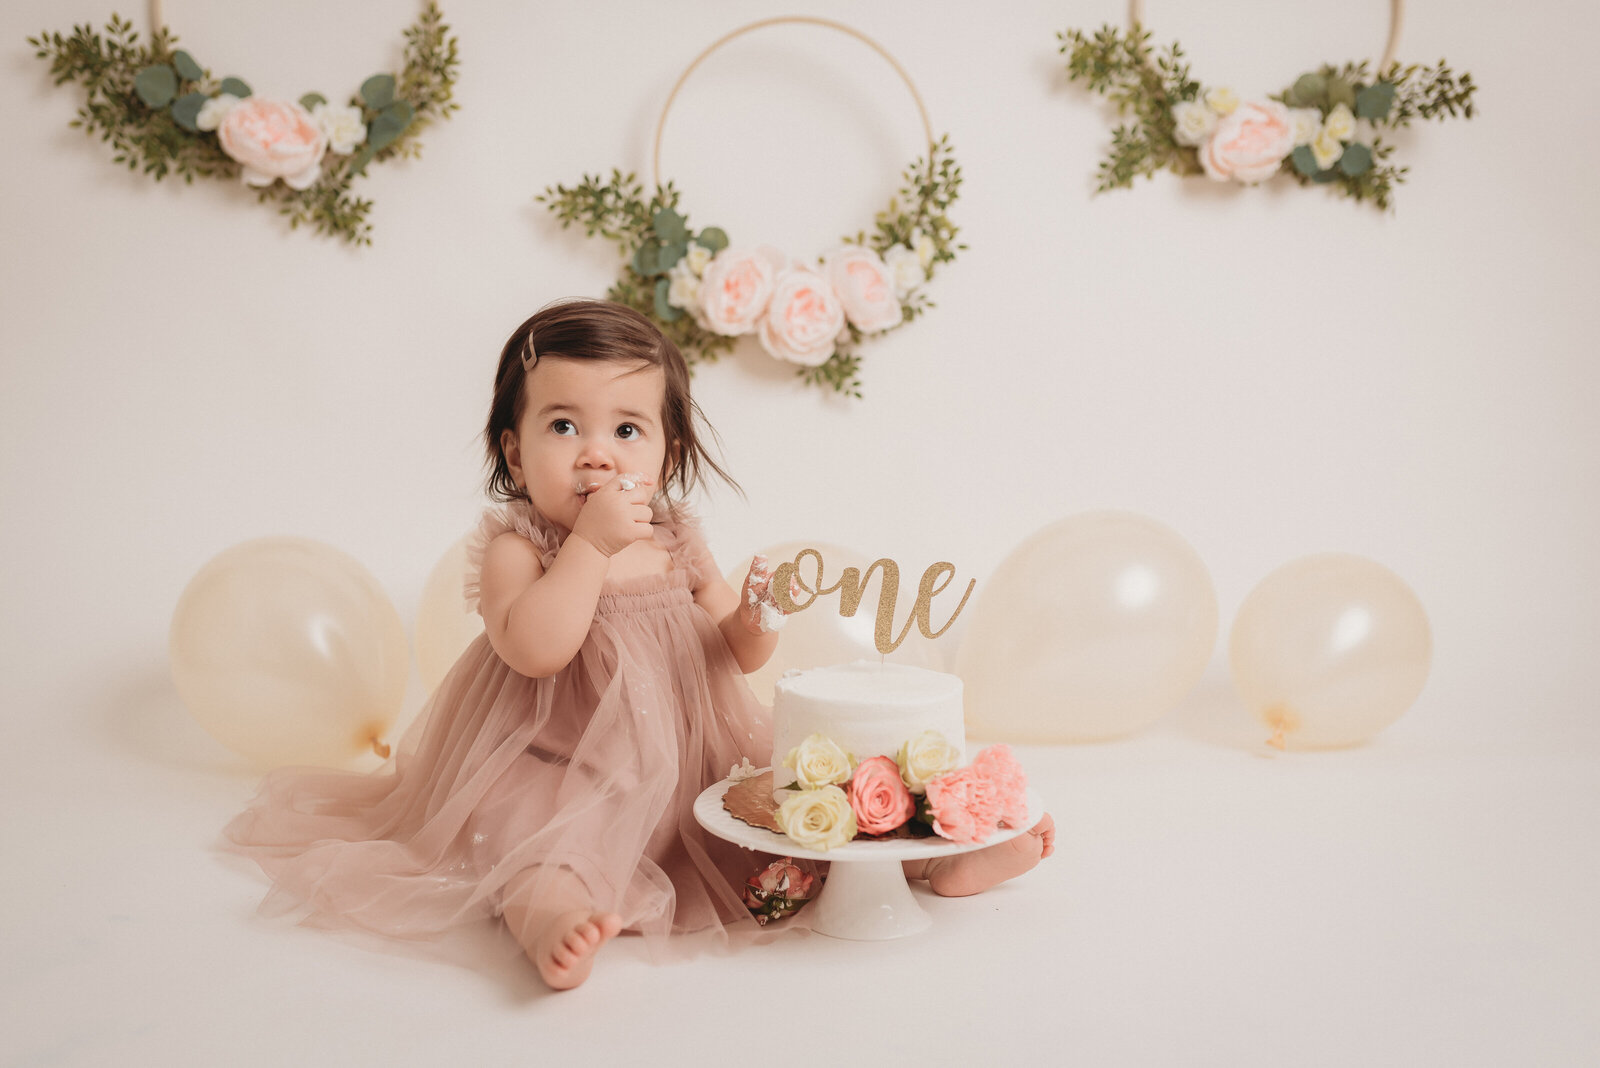 Baby girl eating cake for her smash cake portrait session with tulle dress and pink flowers